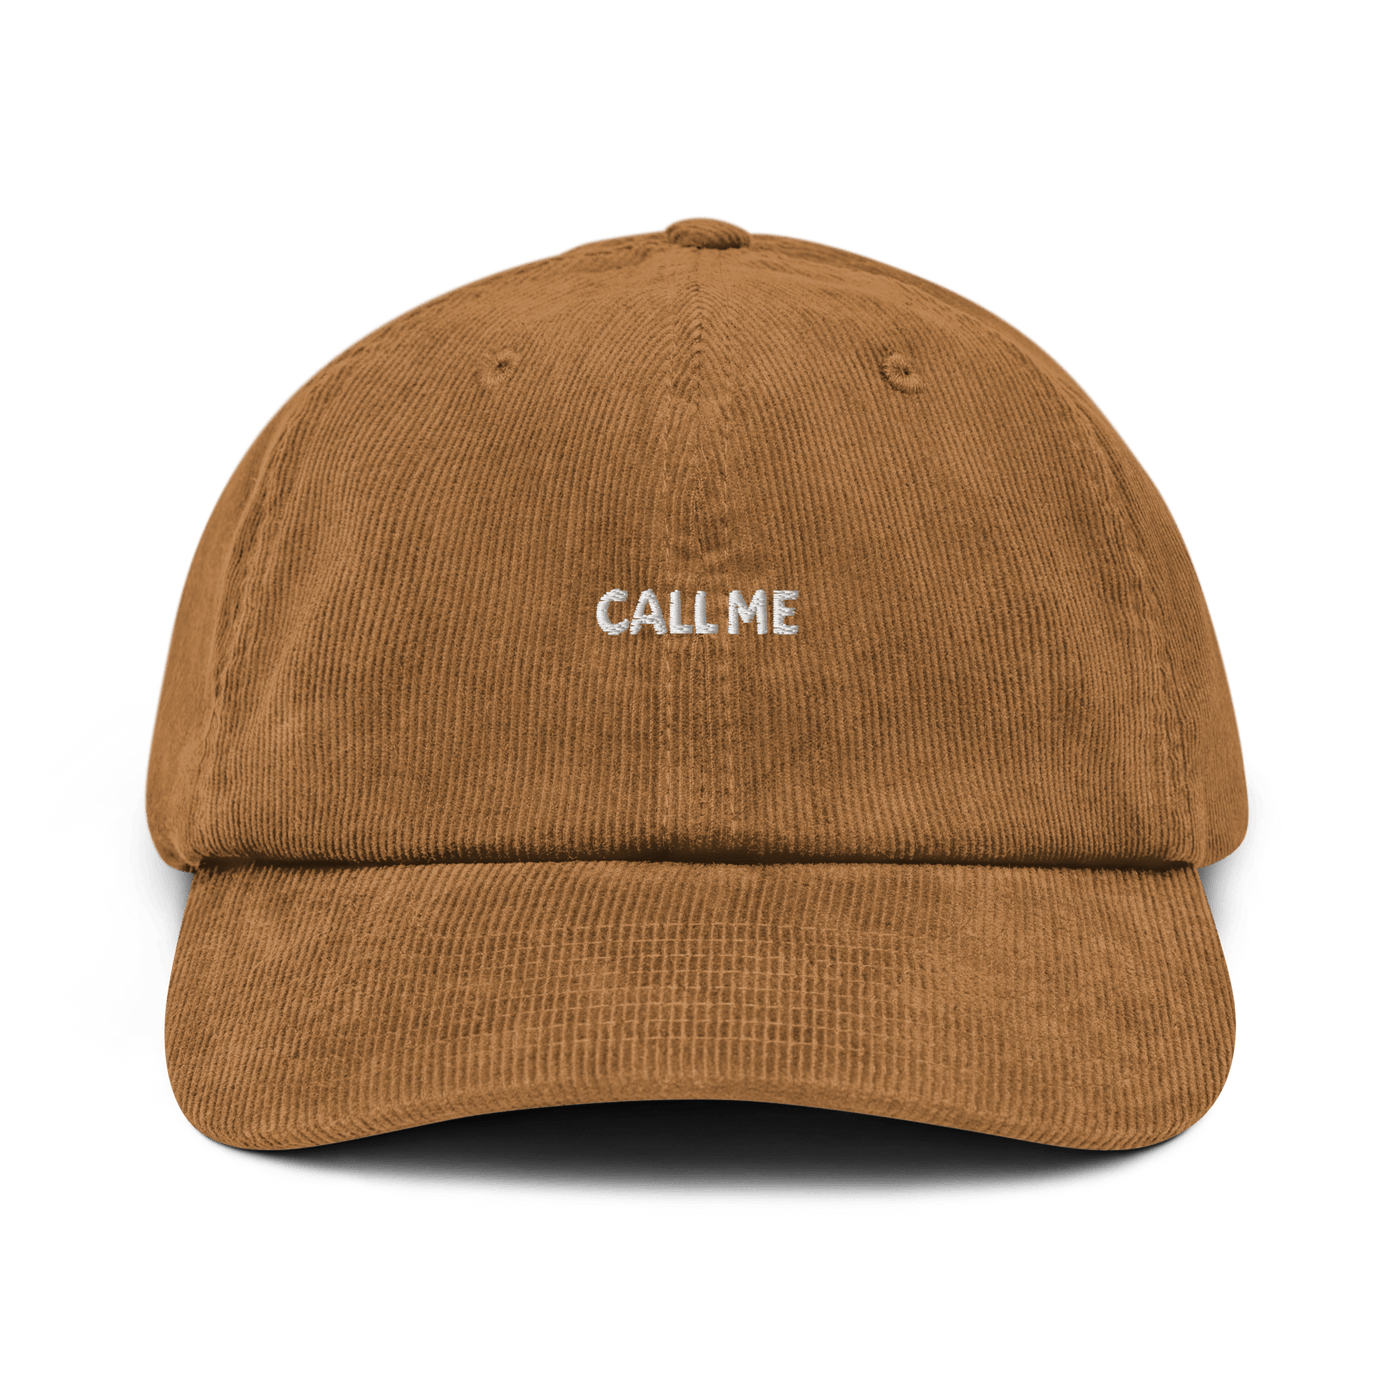 Call me Corduroy hat - Dark Olive - - Just Another Cap Store